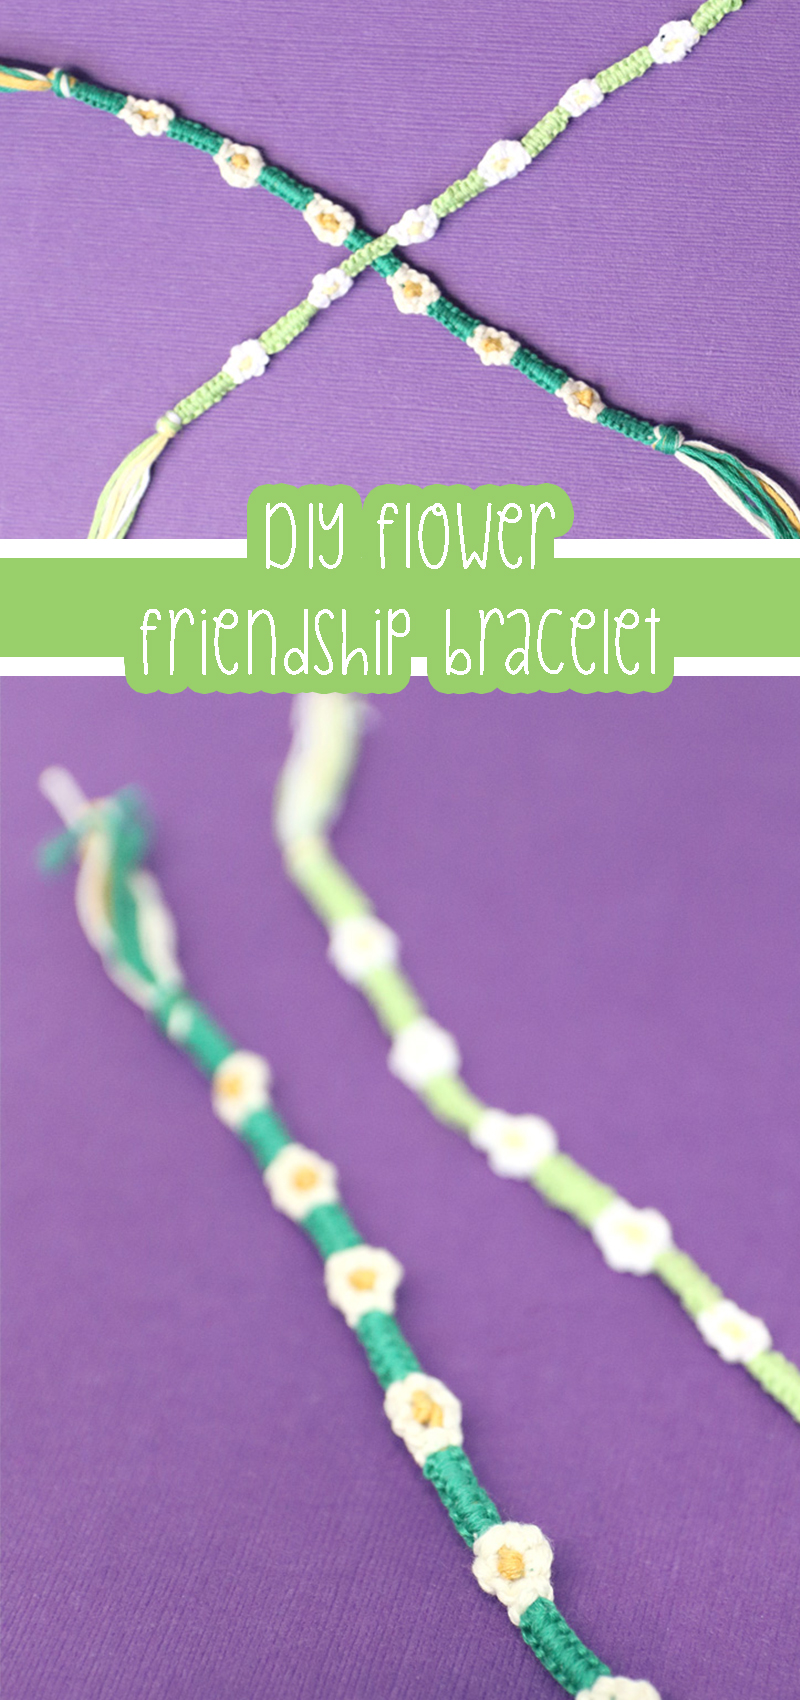 How to Make a Knotted Rosary Bracelet | ehow